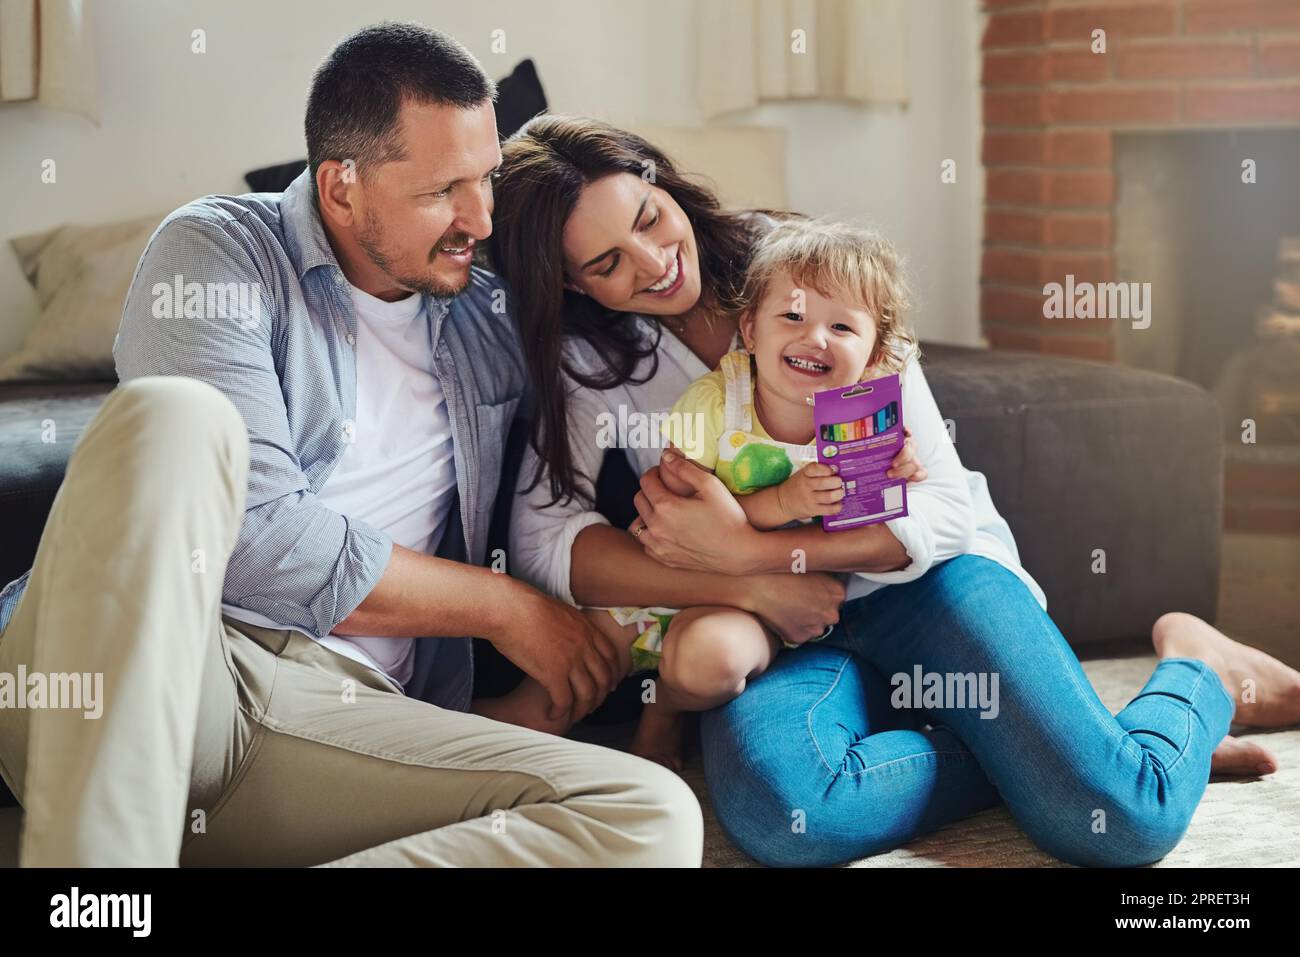 Growing up, children need love and affection. a young mother and father spending time with their adorable little daughter in the living room at home. Stock Photo